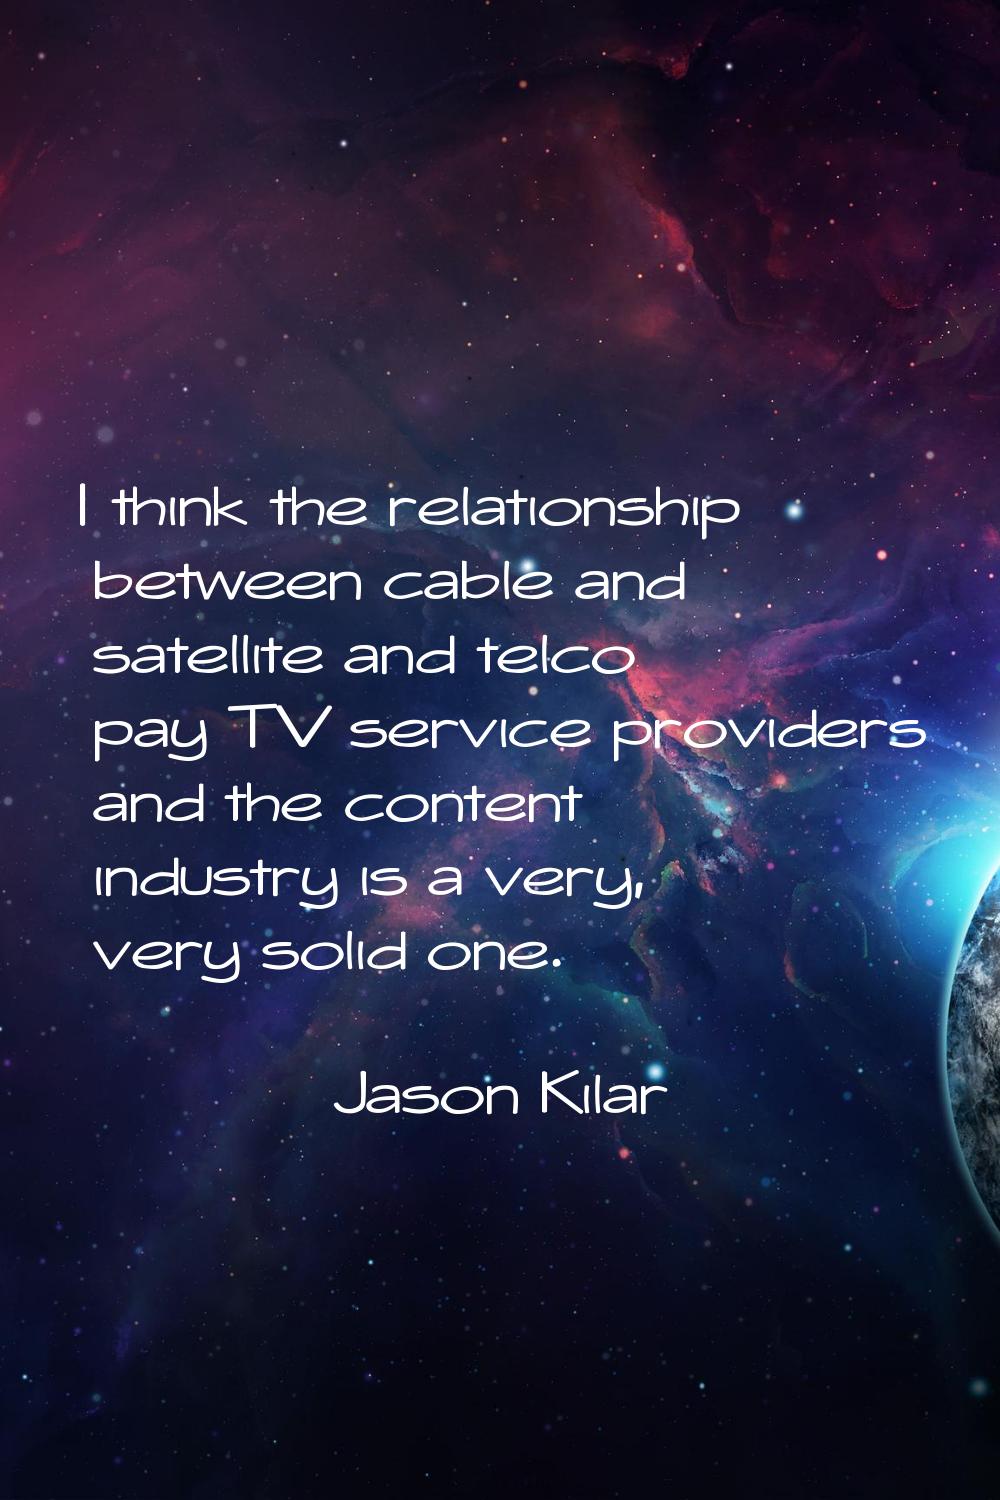 I think the relationship between cable and satellite and telco pay TV service providers and the con